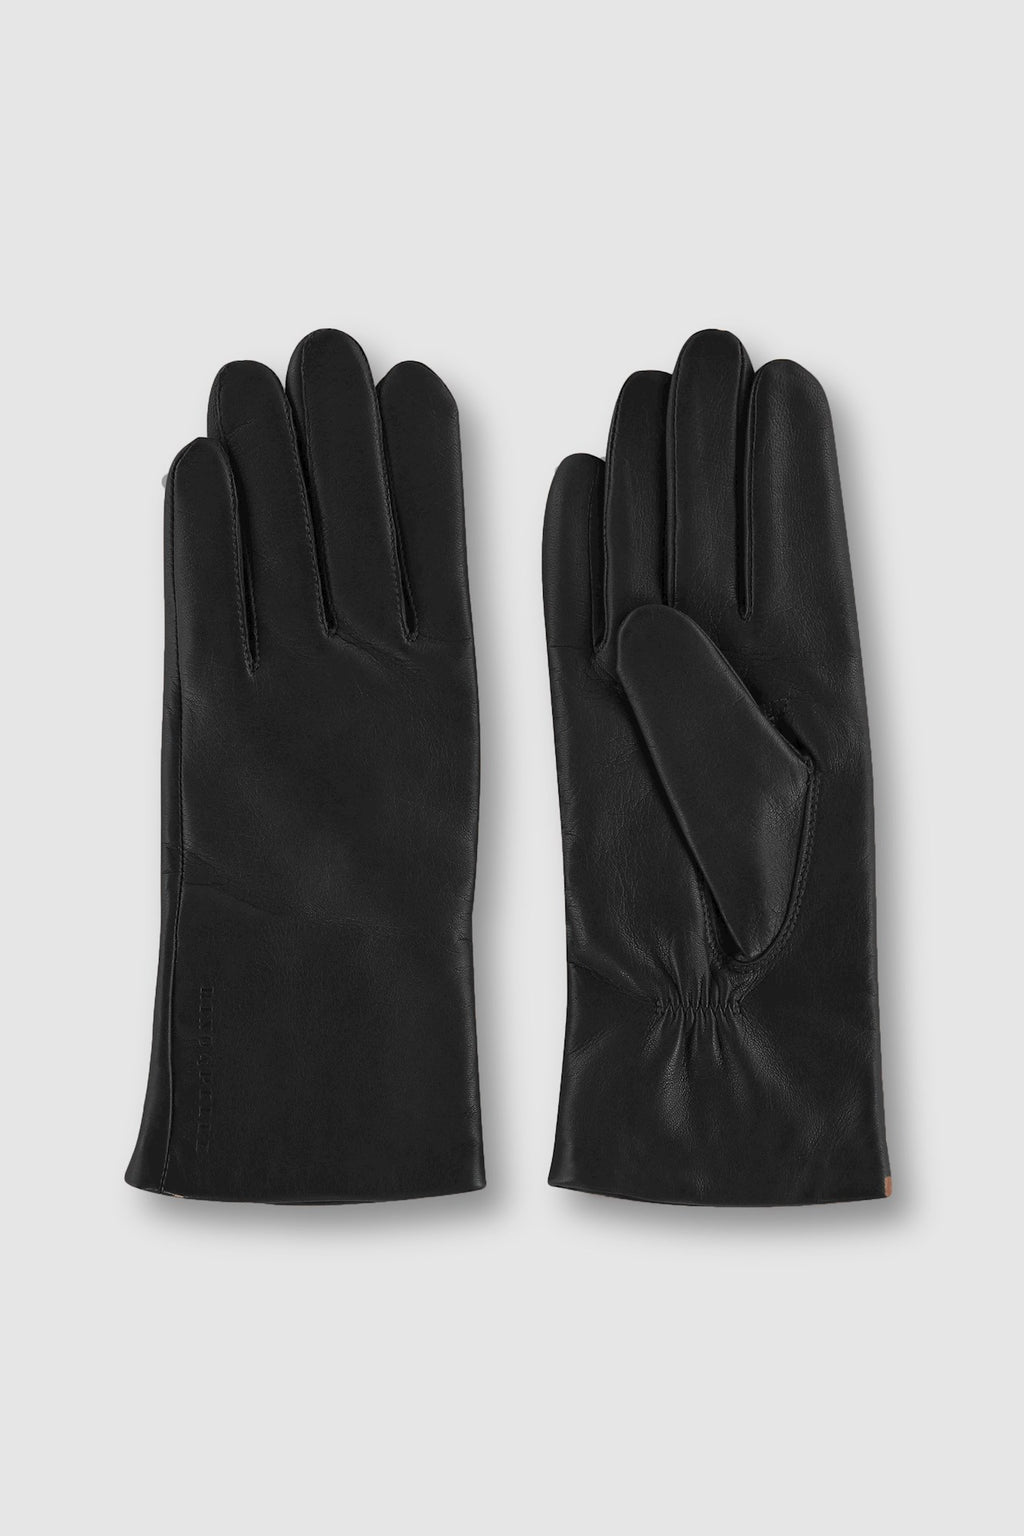 Rino & Pelle Gloves ANNICA Soft Lamb Leather Lined Black